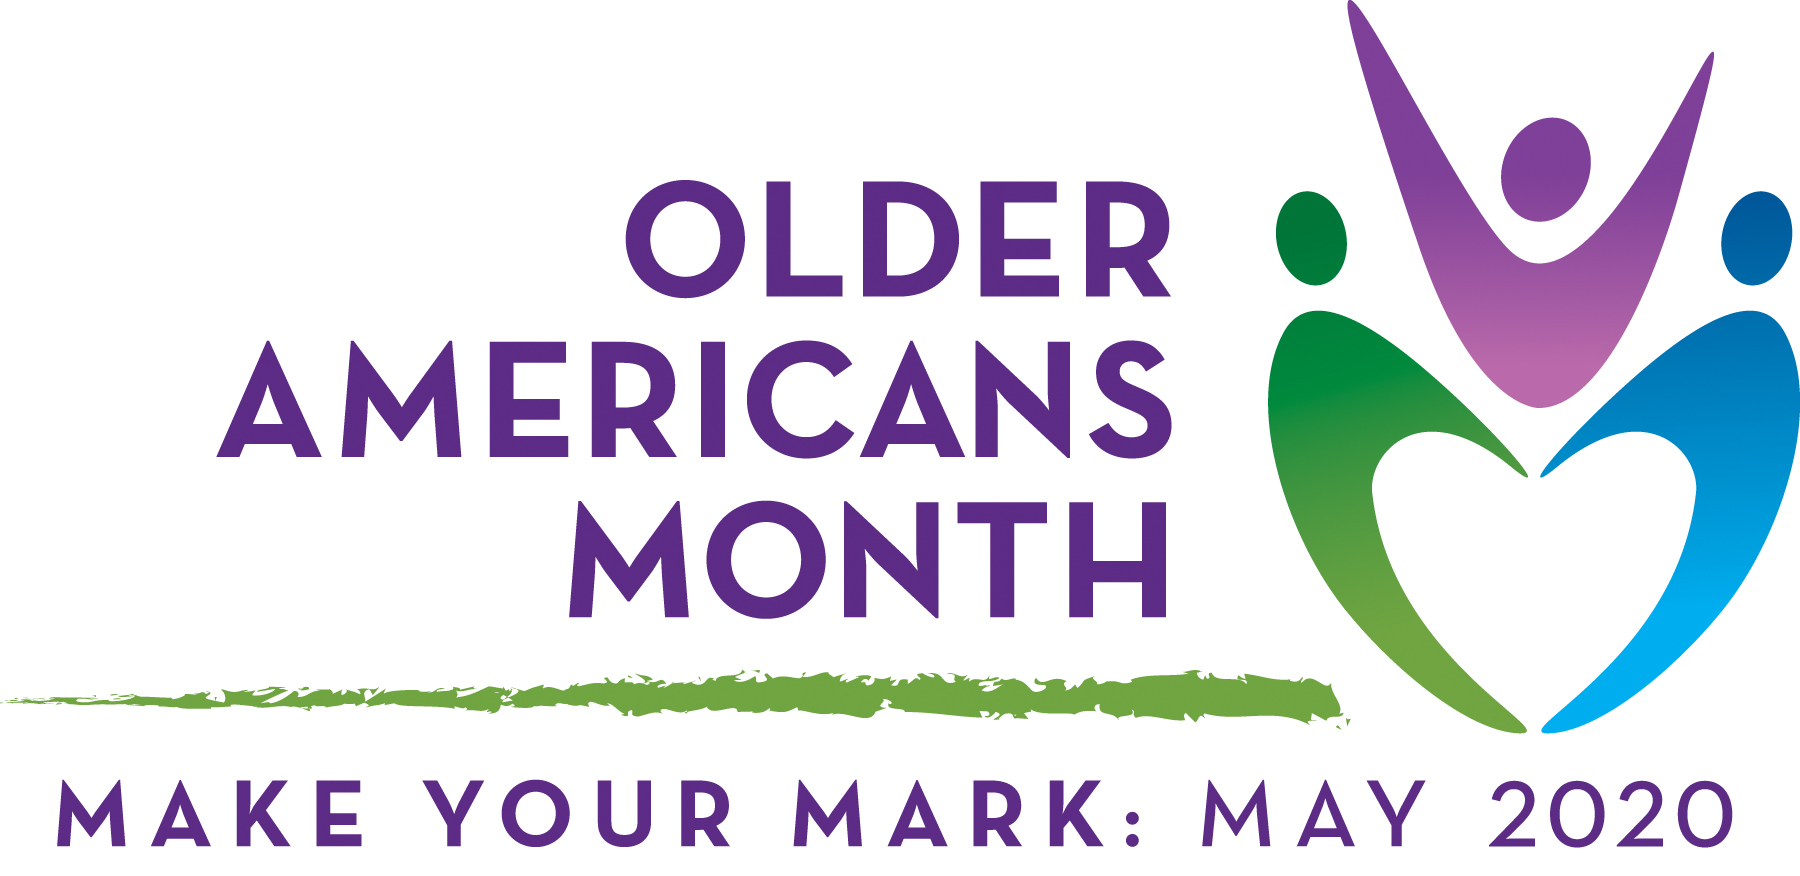 Older Americans Month 16 Acl Administration For Community Living